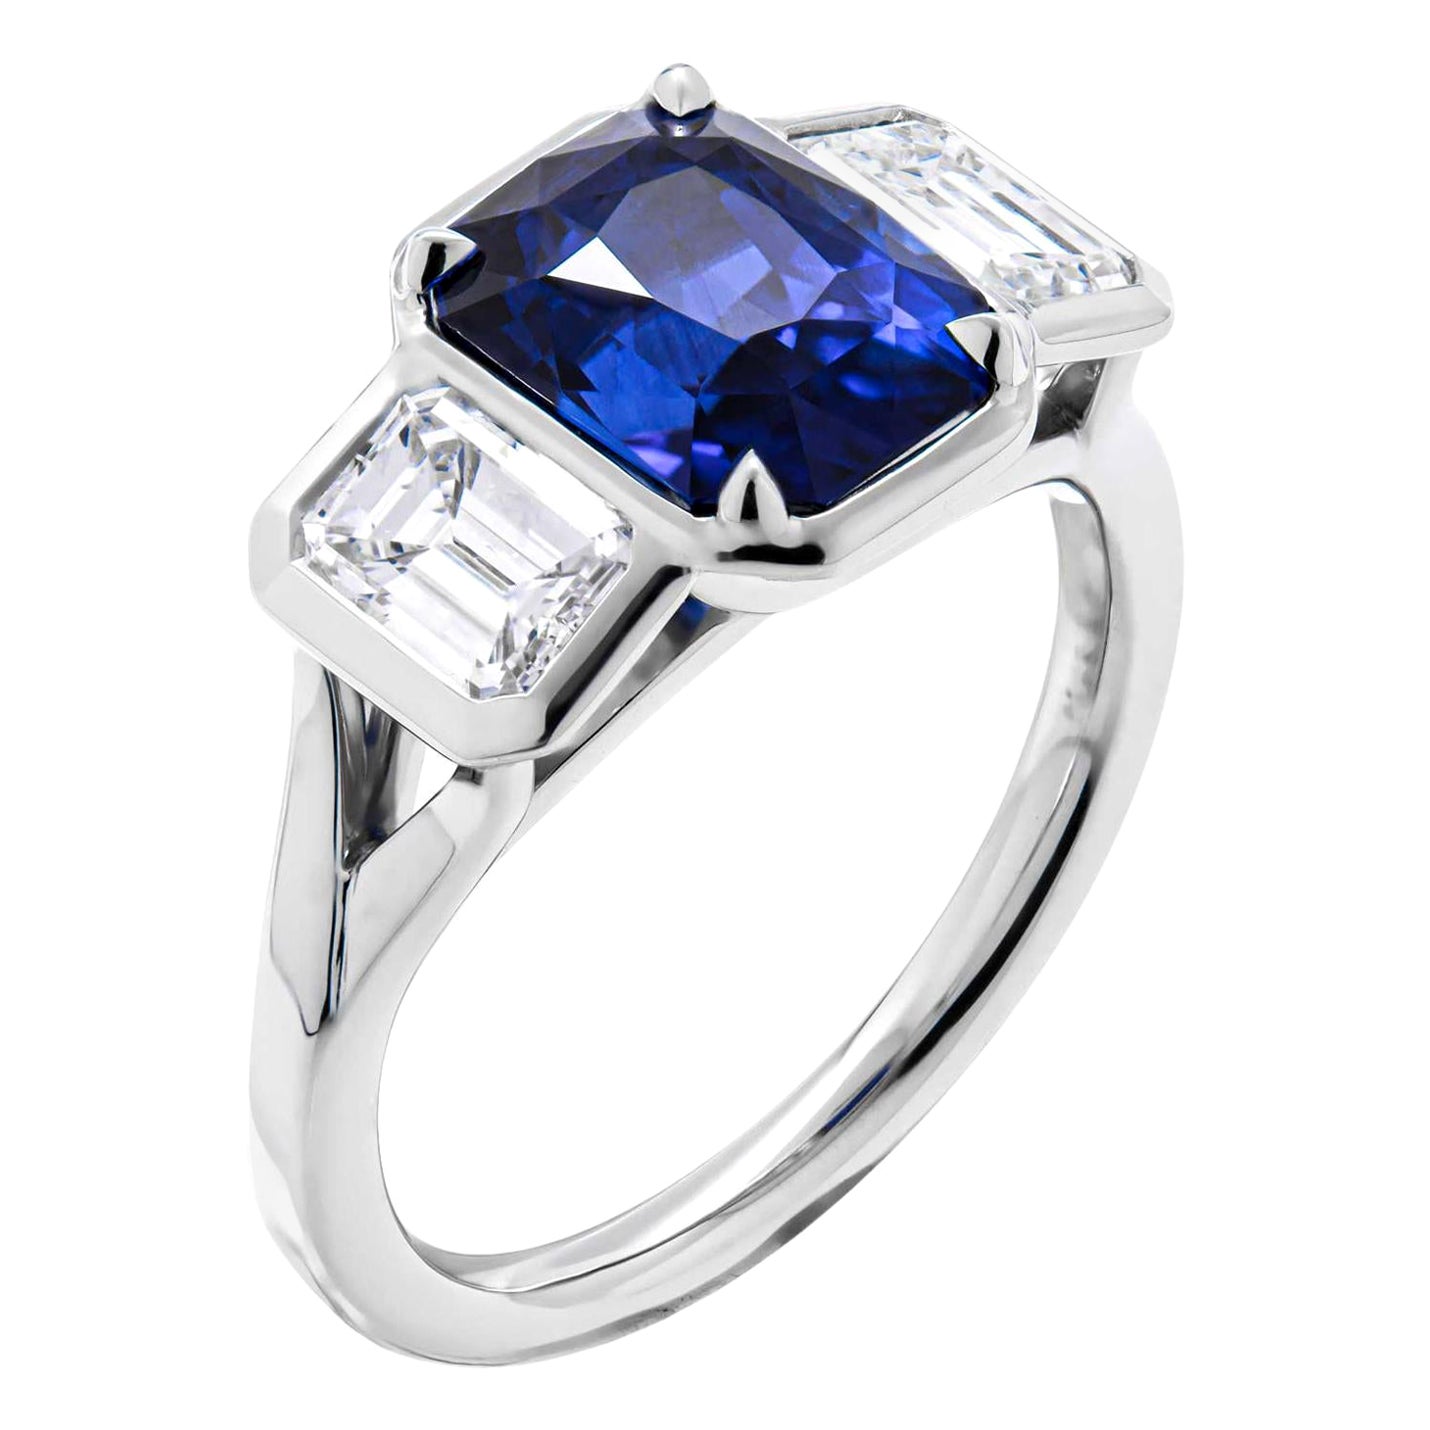 GIA Certified 3 Stone Ring with 3.31ct Blue Sapphire